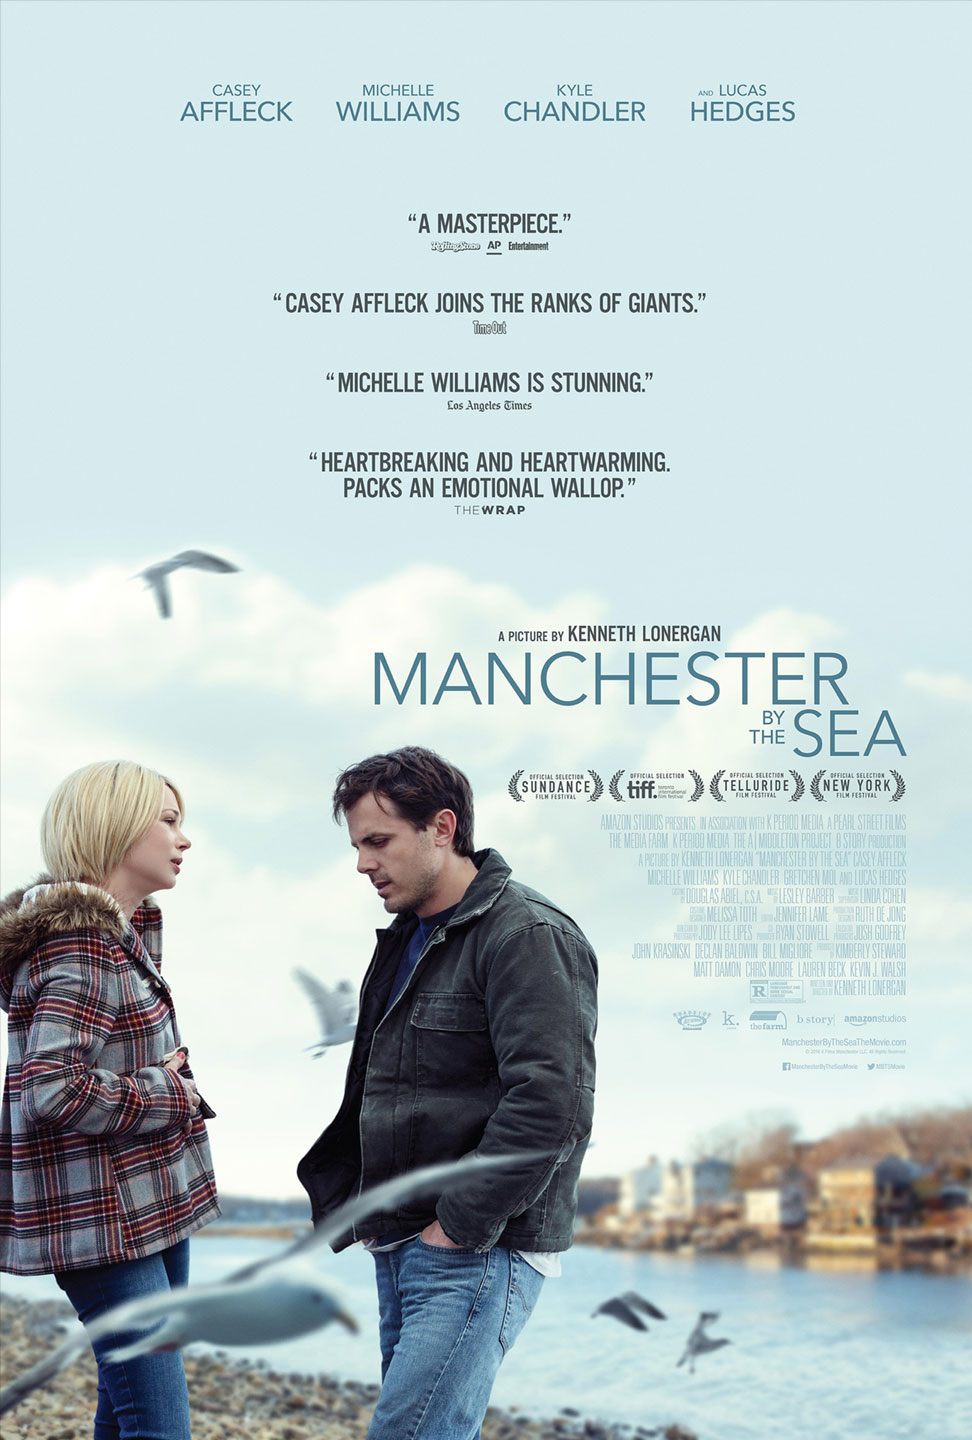 Featured image for “Manchester by the Sea”